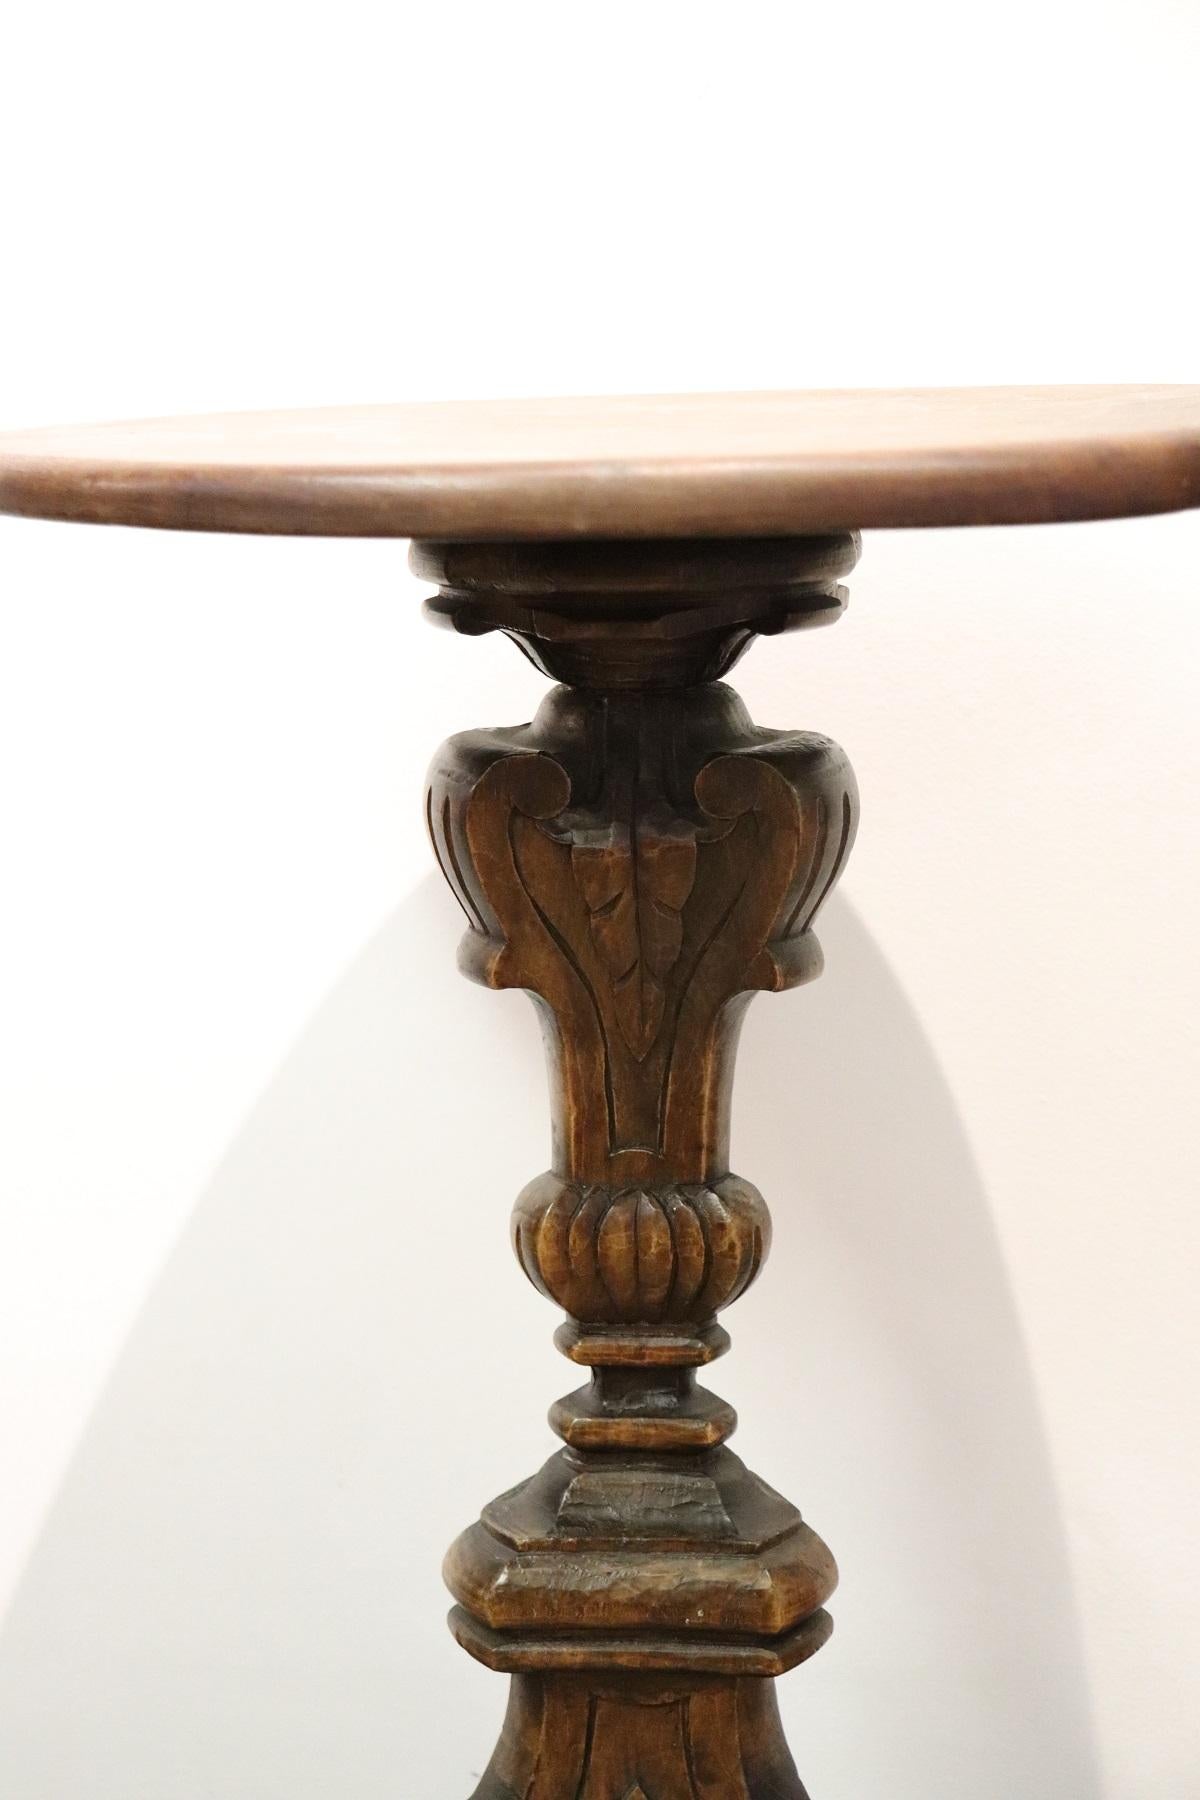 Late 19th Century 19th Century Italian Carved Walnut Round Side Table or Pedestal Table